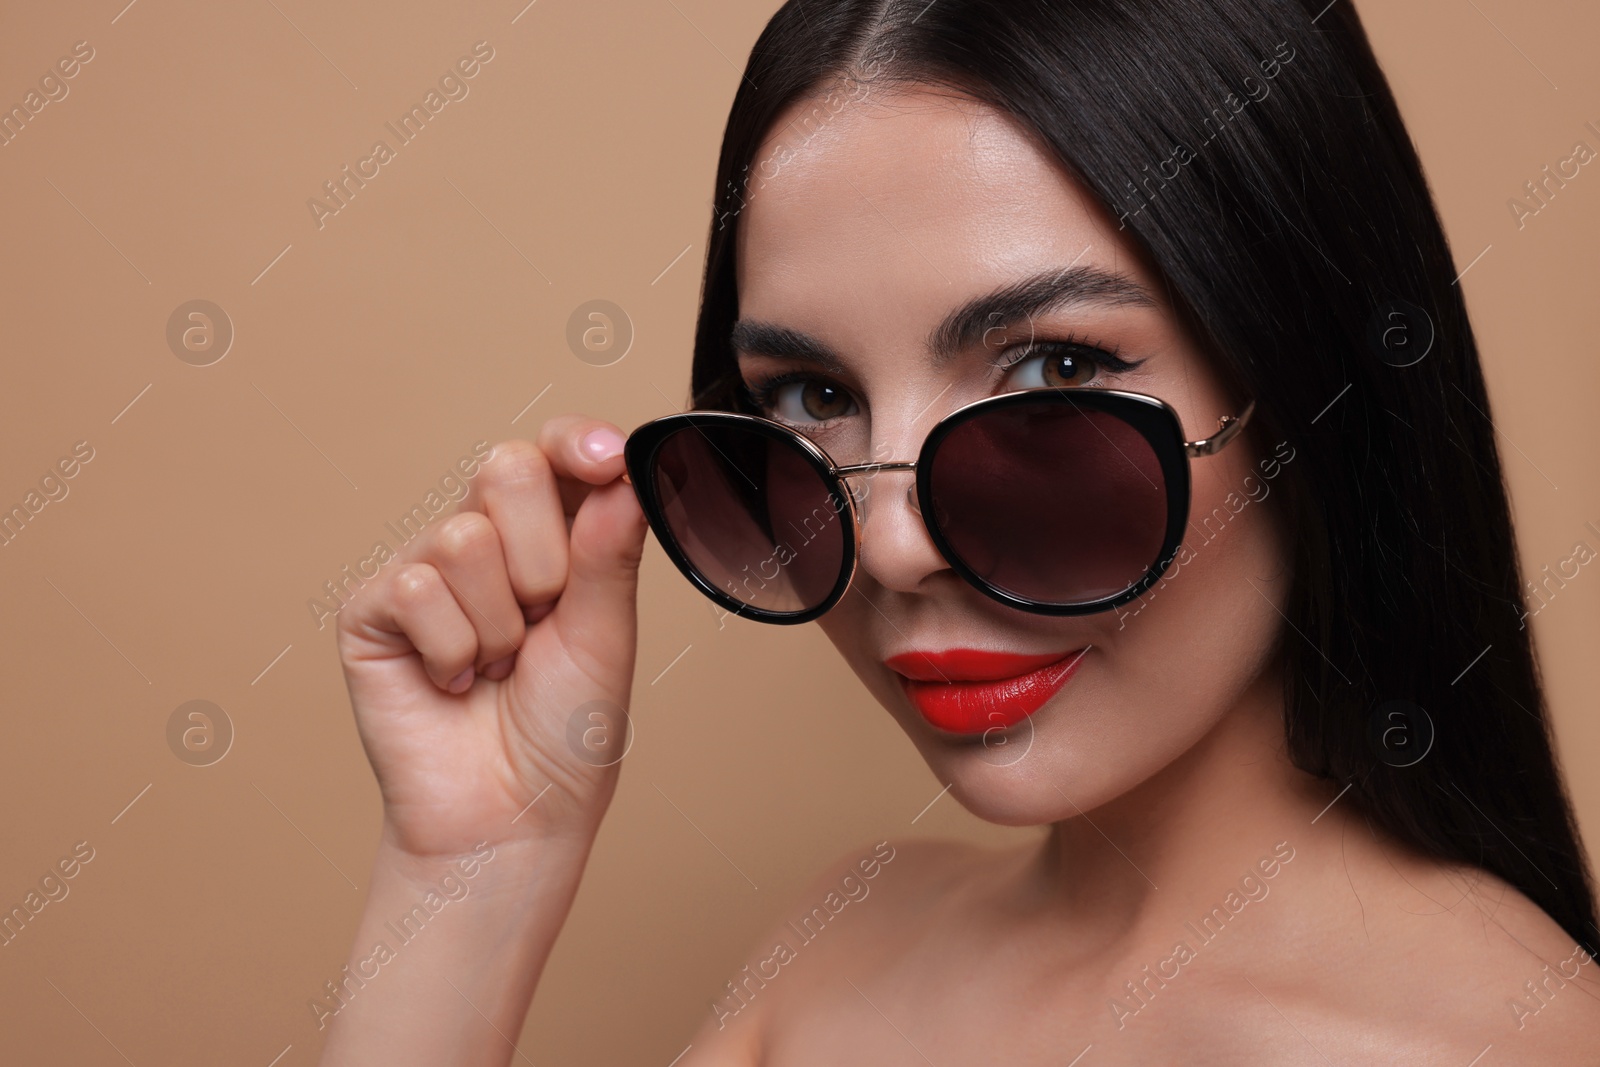 Photo of Attractive woman wearing fashionable sunglasses against beige background, closeup